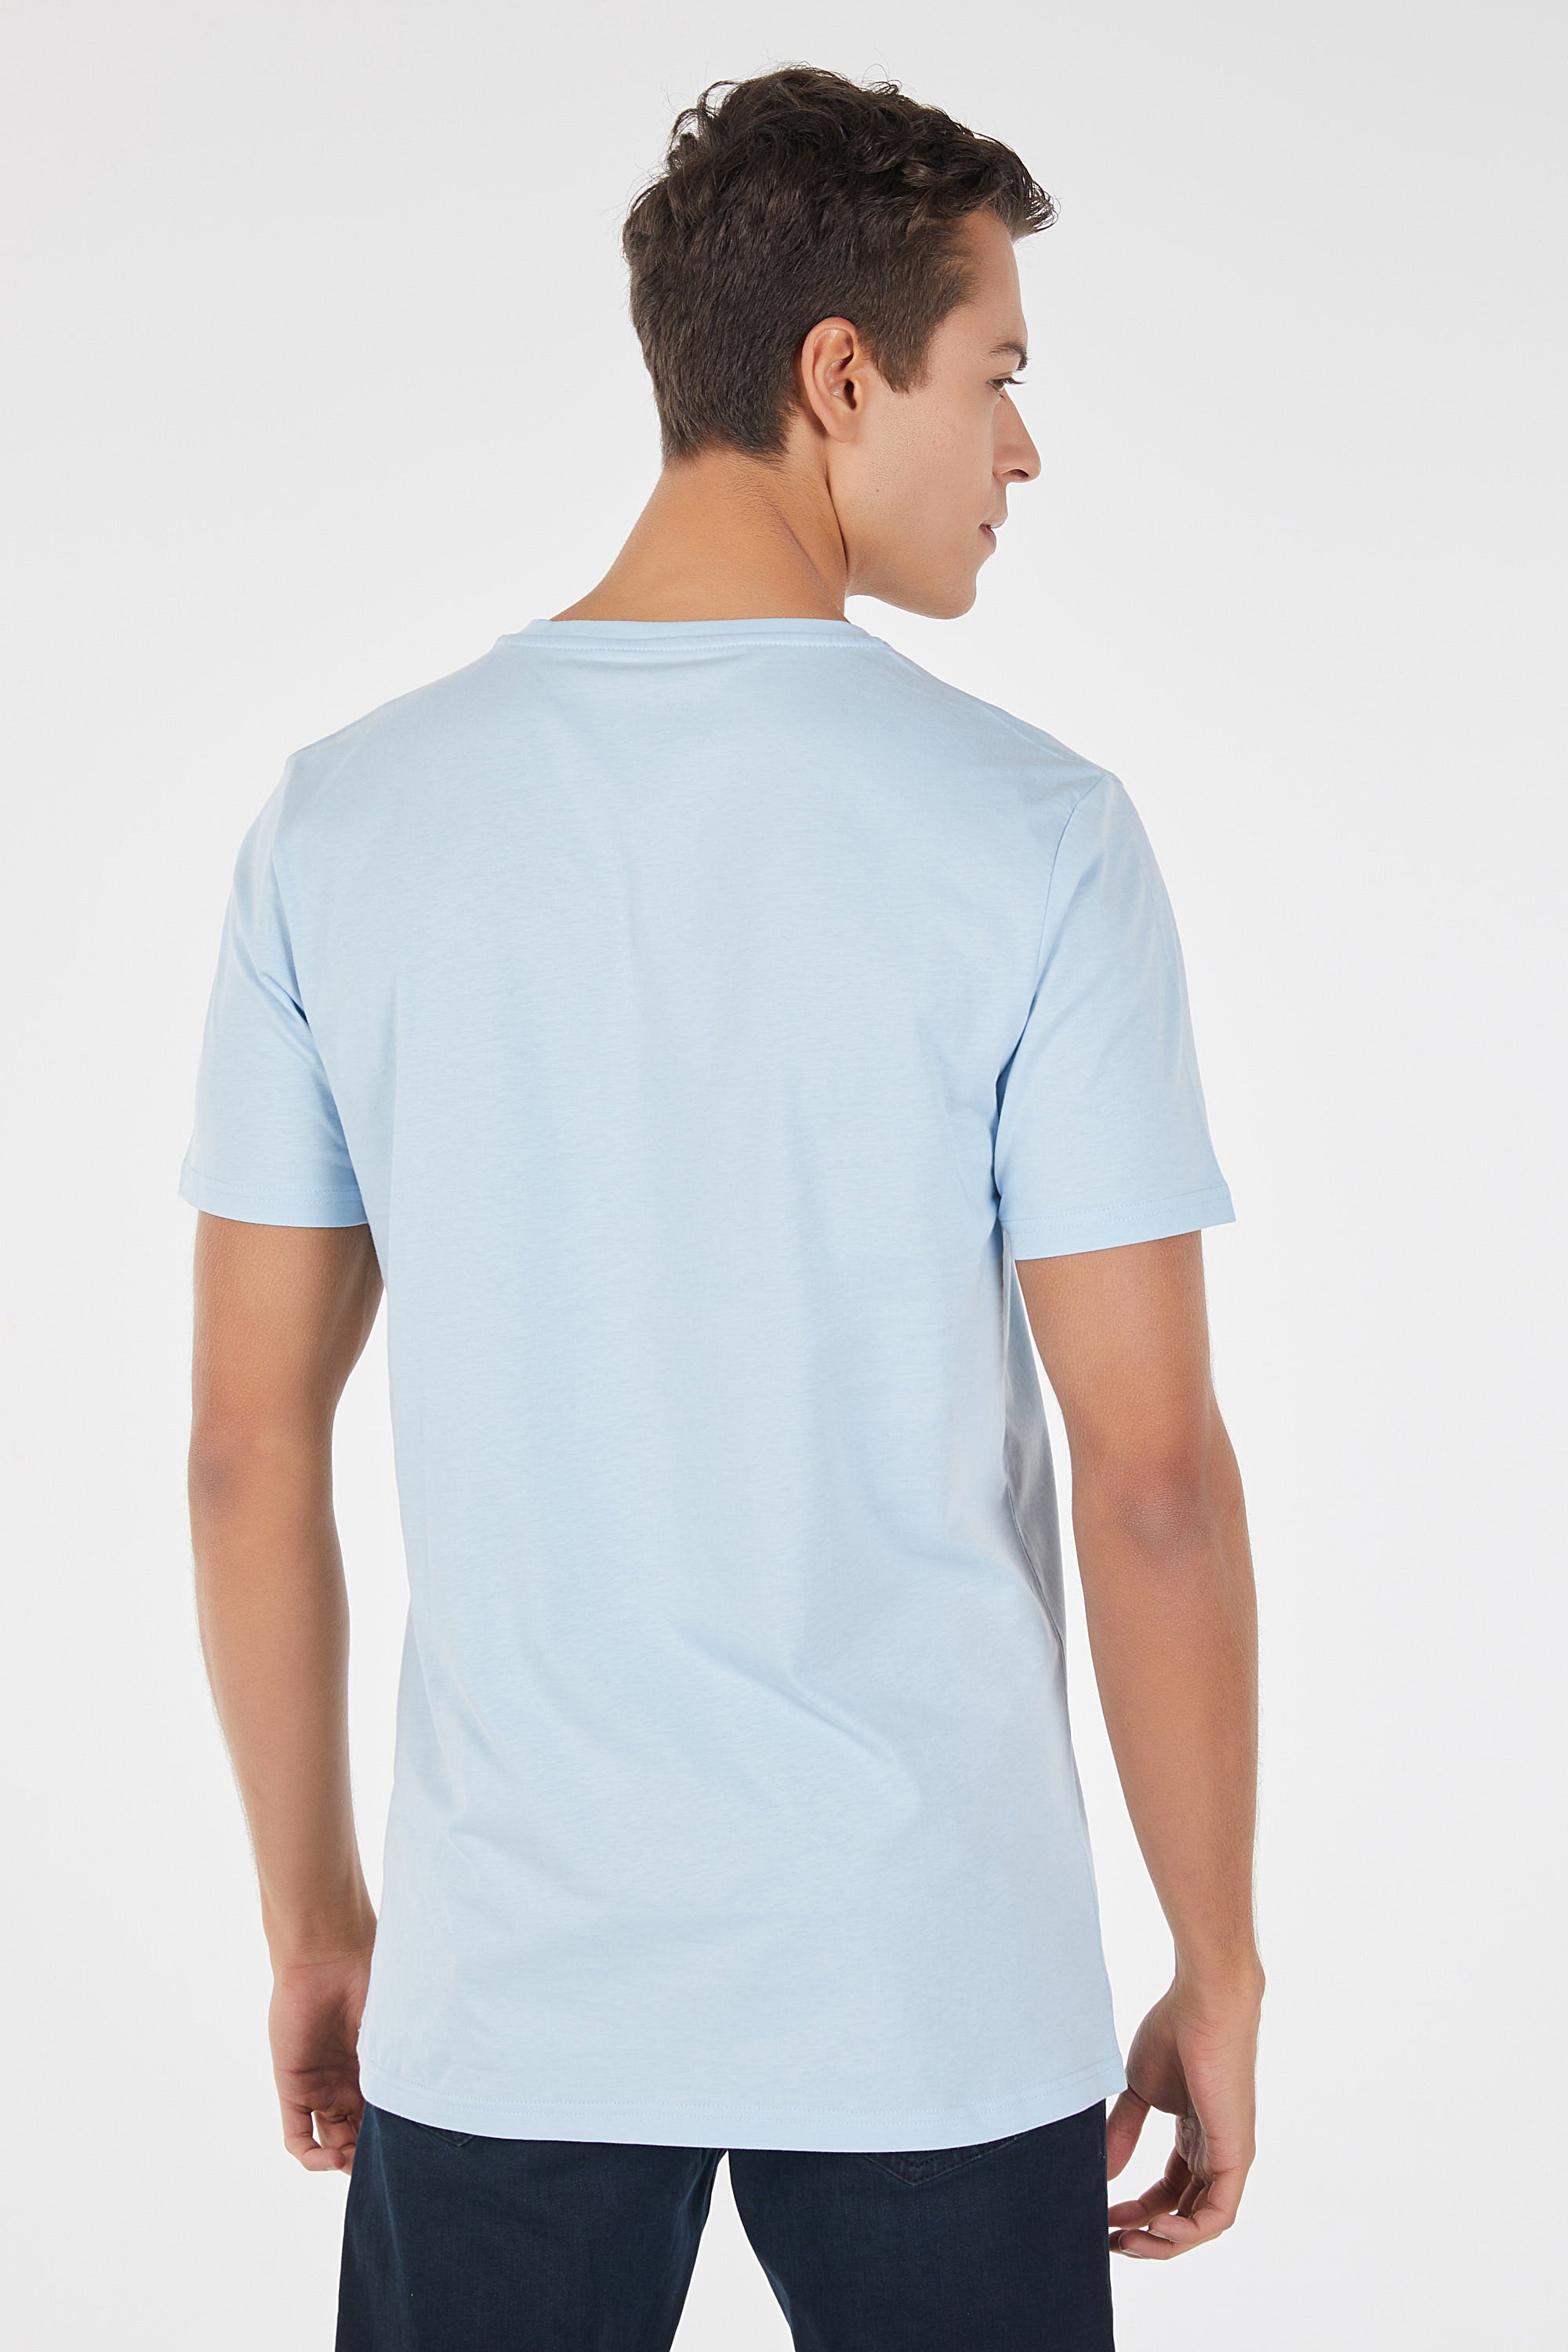 Ajax Ice Blue T-Shirt For Man | Vary Fits